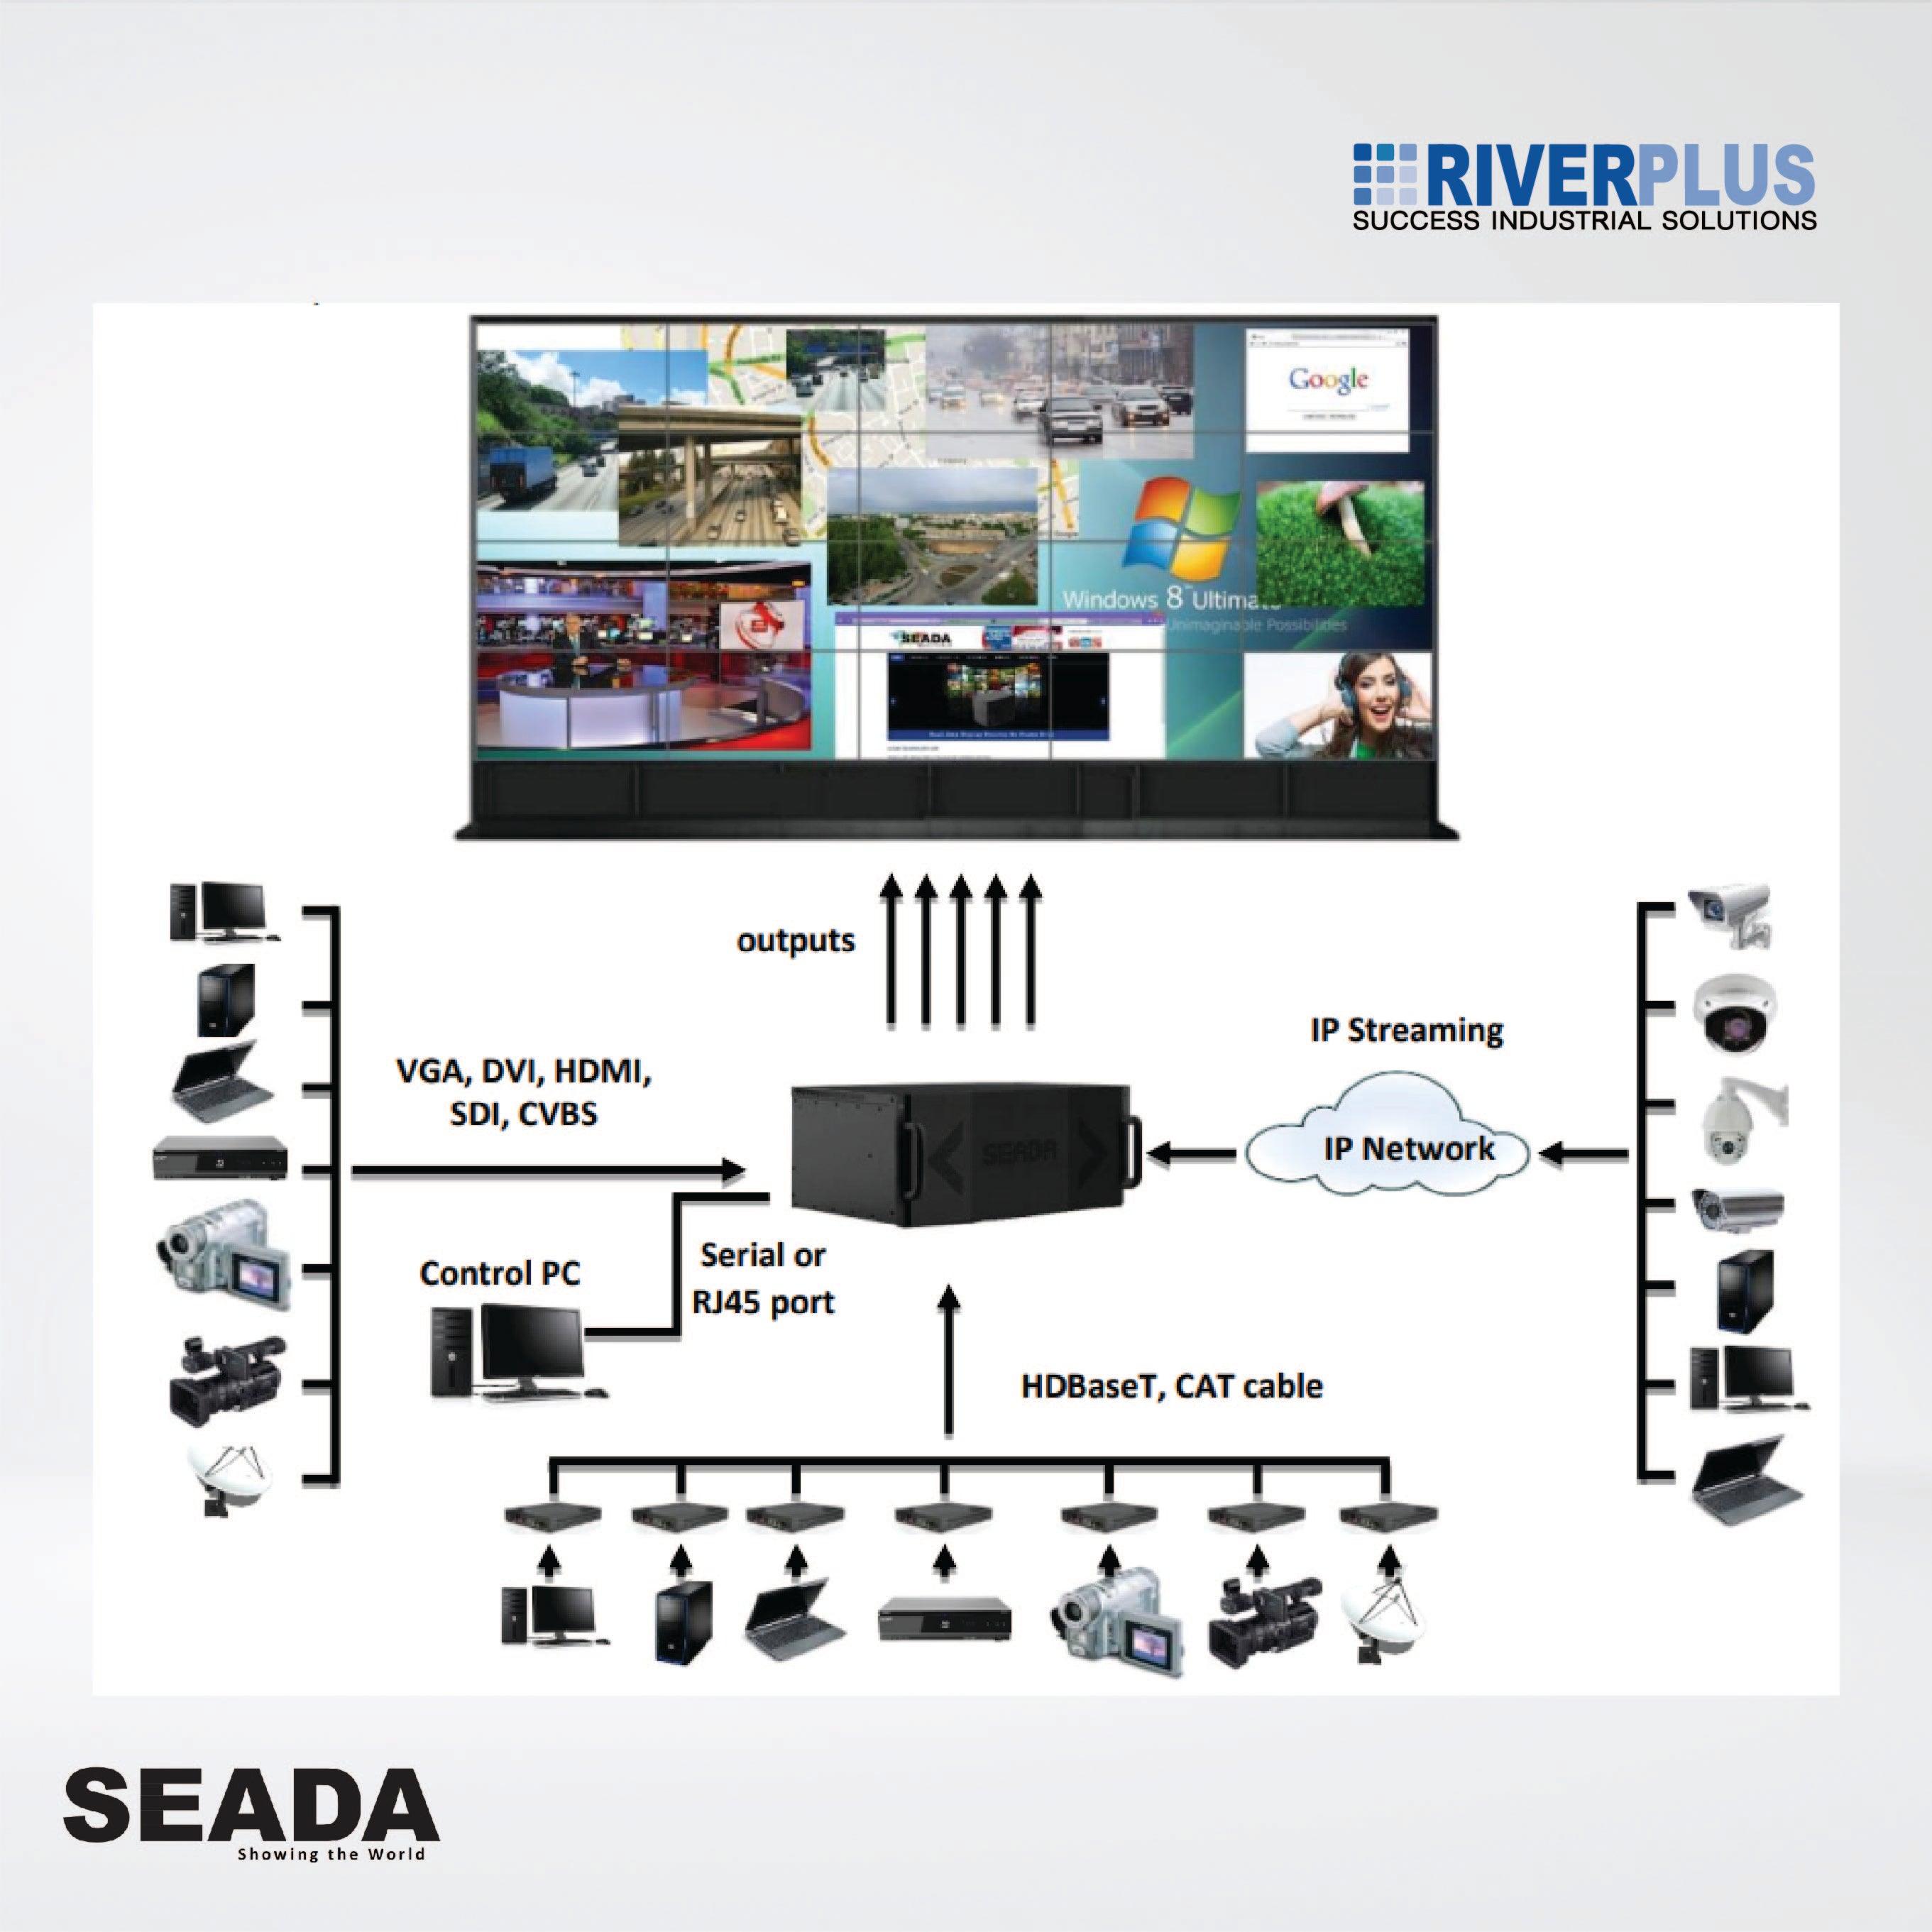 SWP02 CHASSIS 2U, 16 INPUT/8 OUTPUT ,Video wall controllers are the most Advanced solution - Riverplus